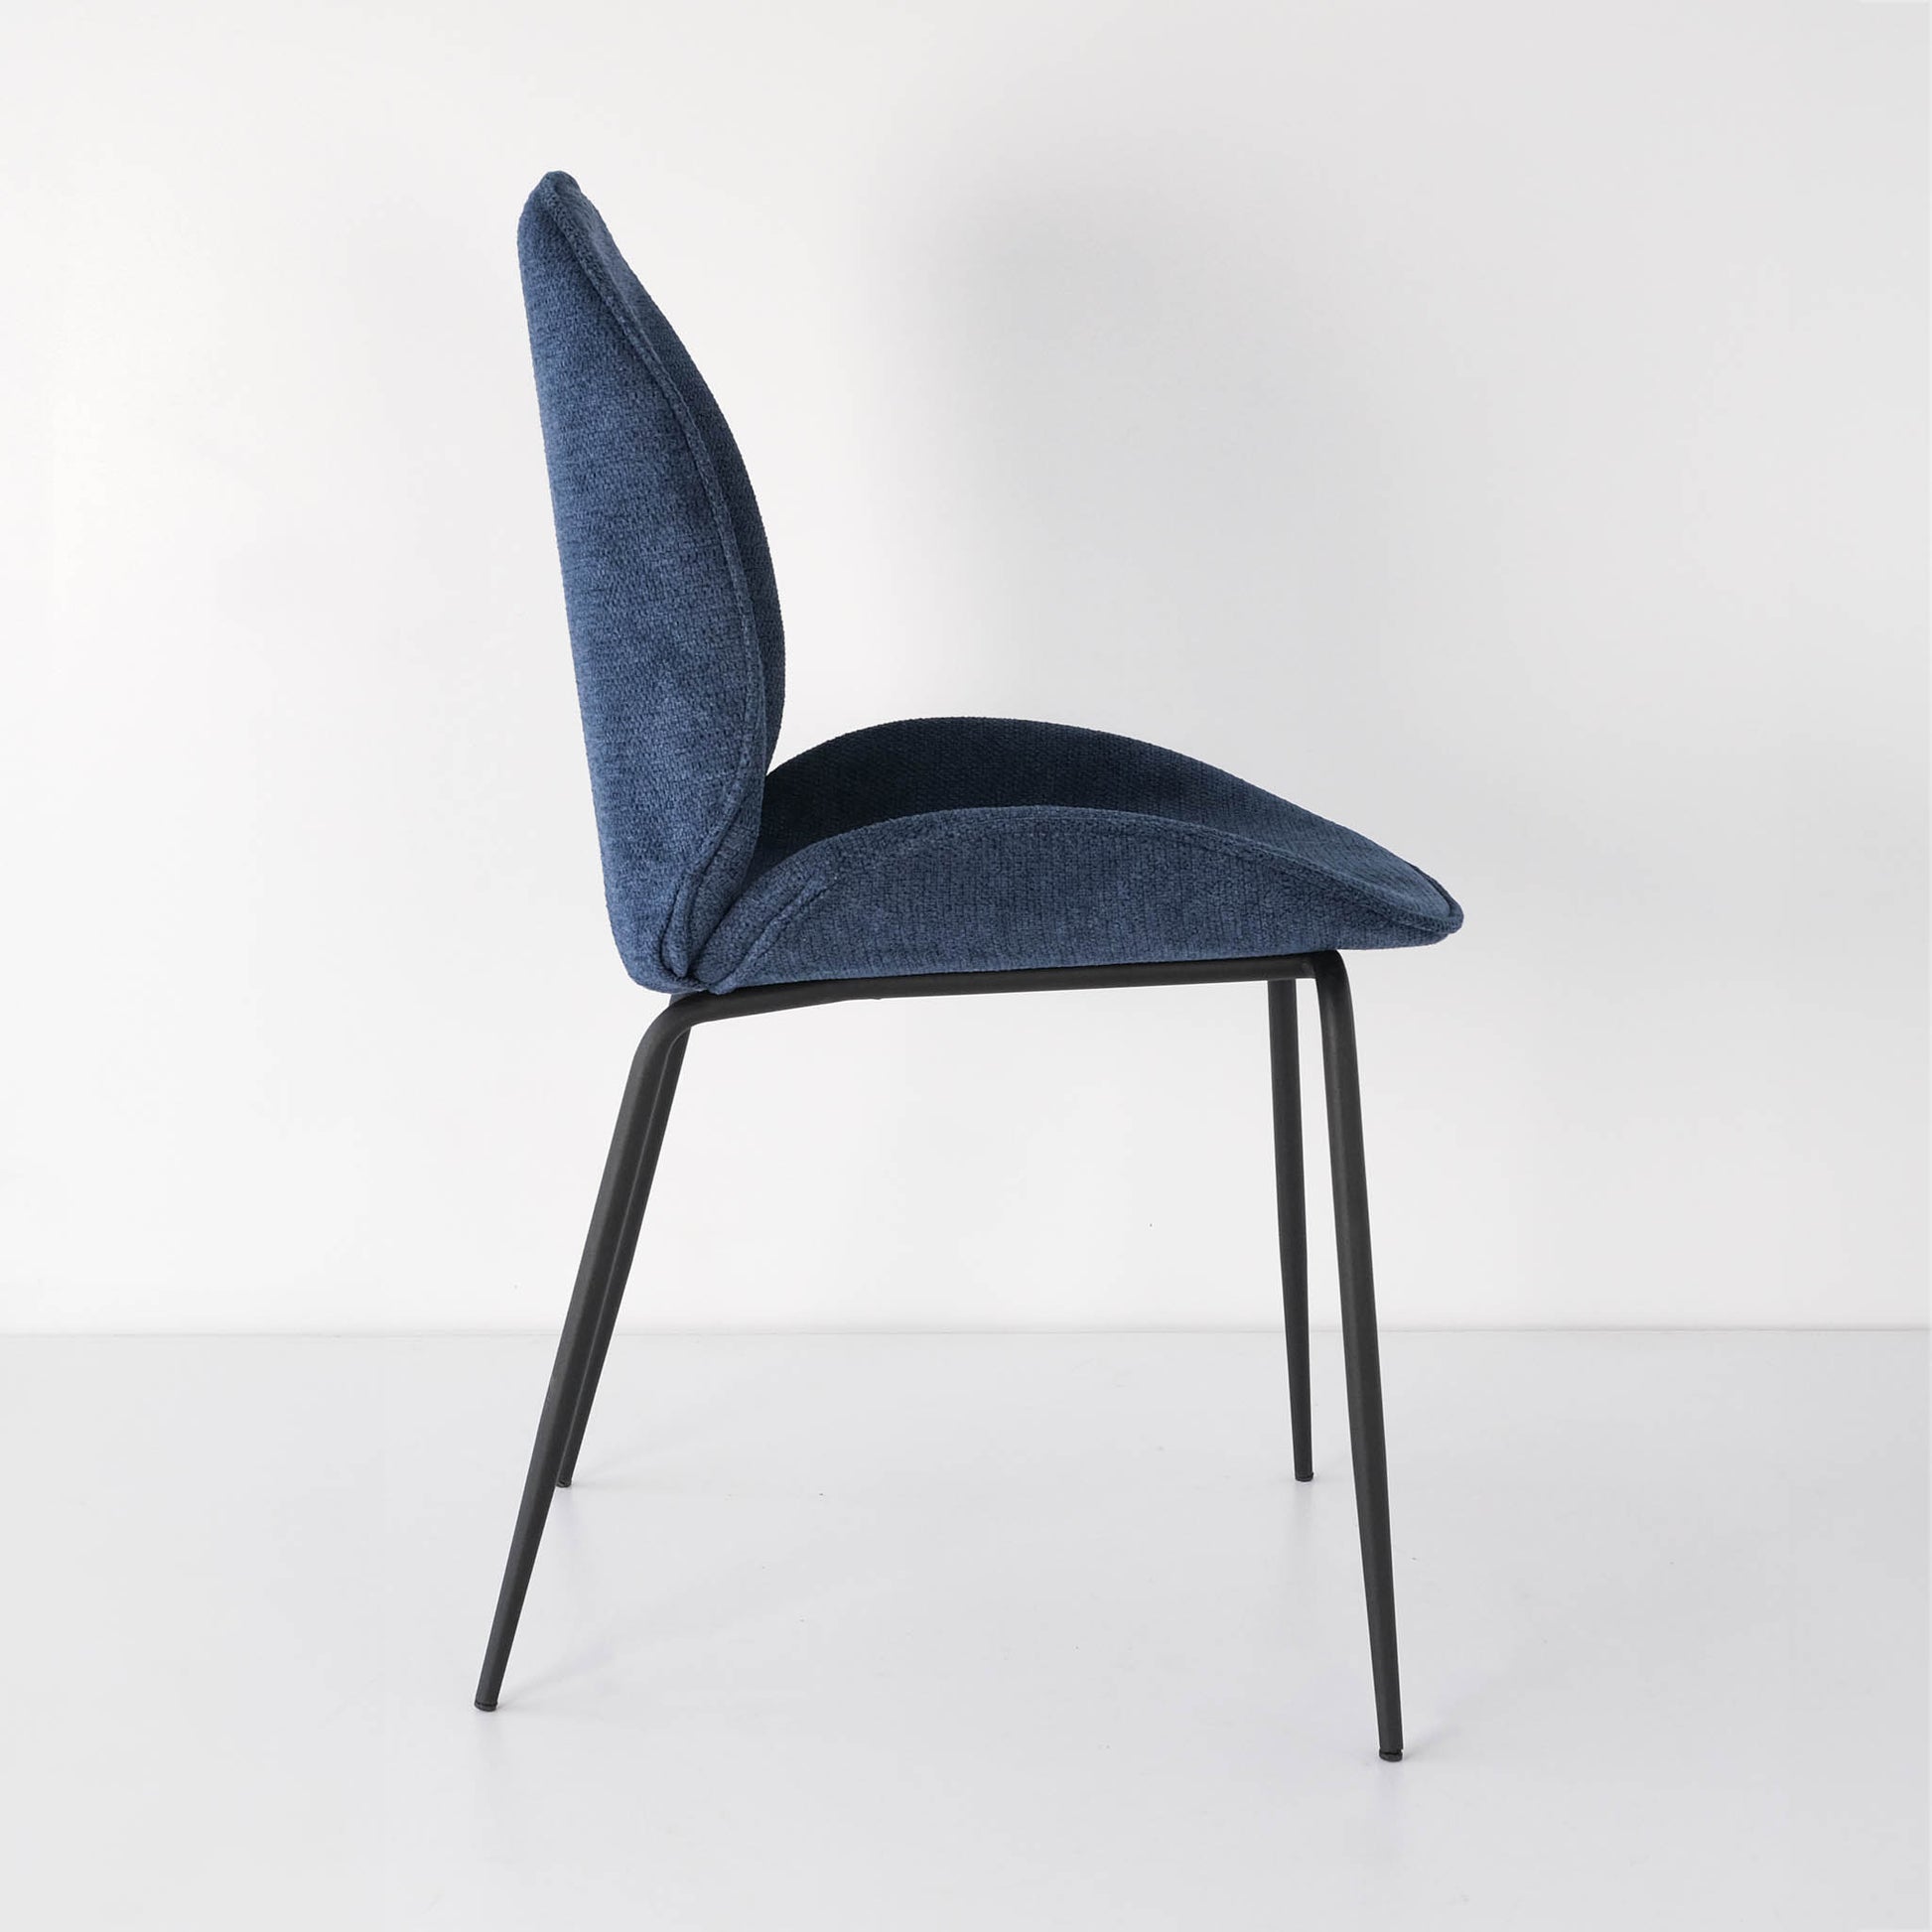 Side view of a vibrant and elegant royal blue Beetle dining chair